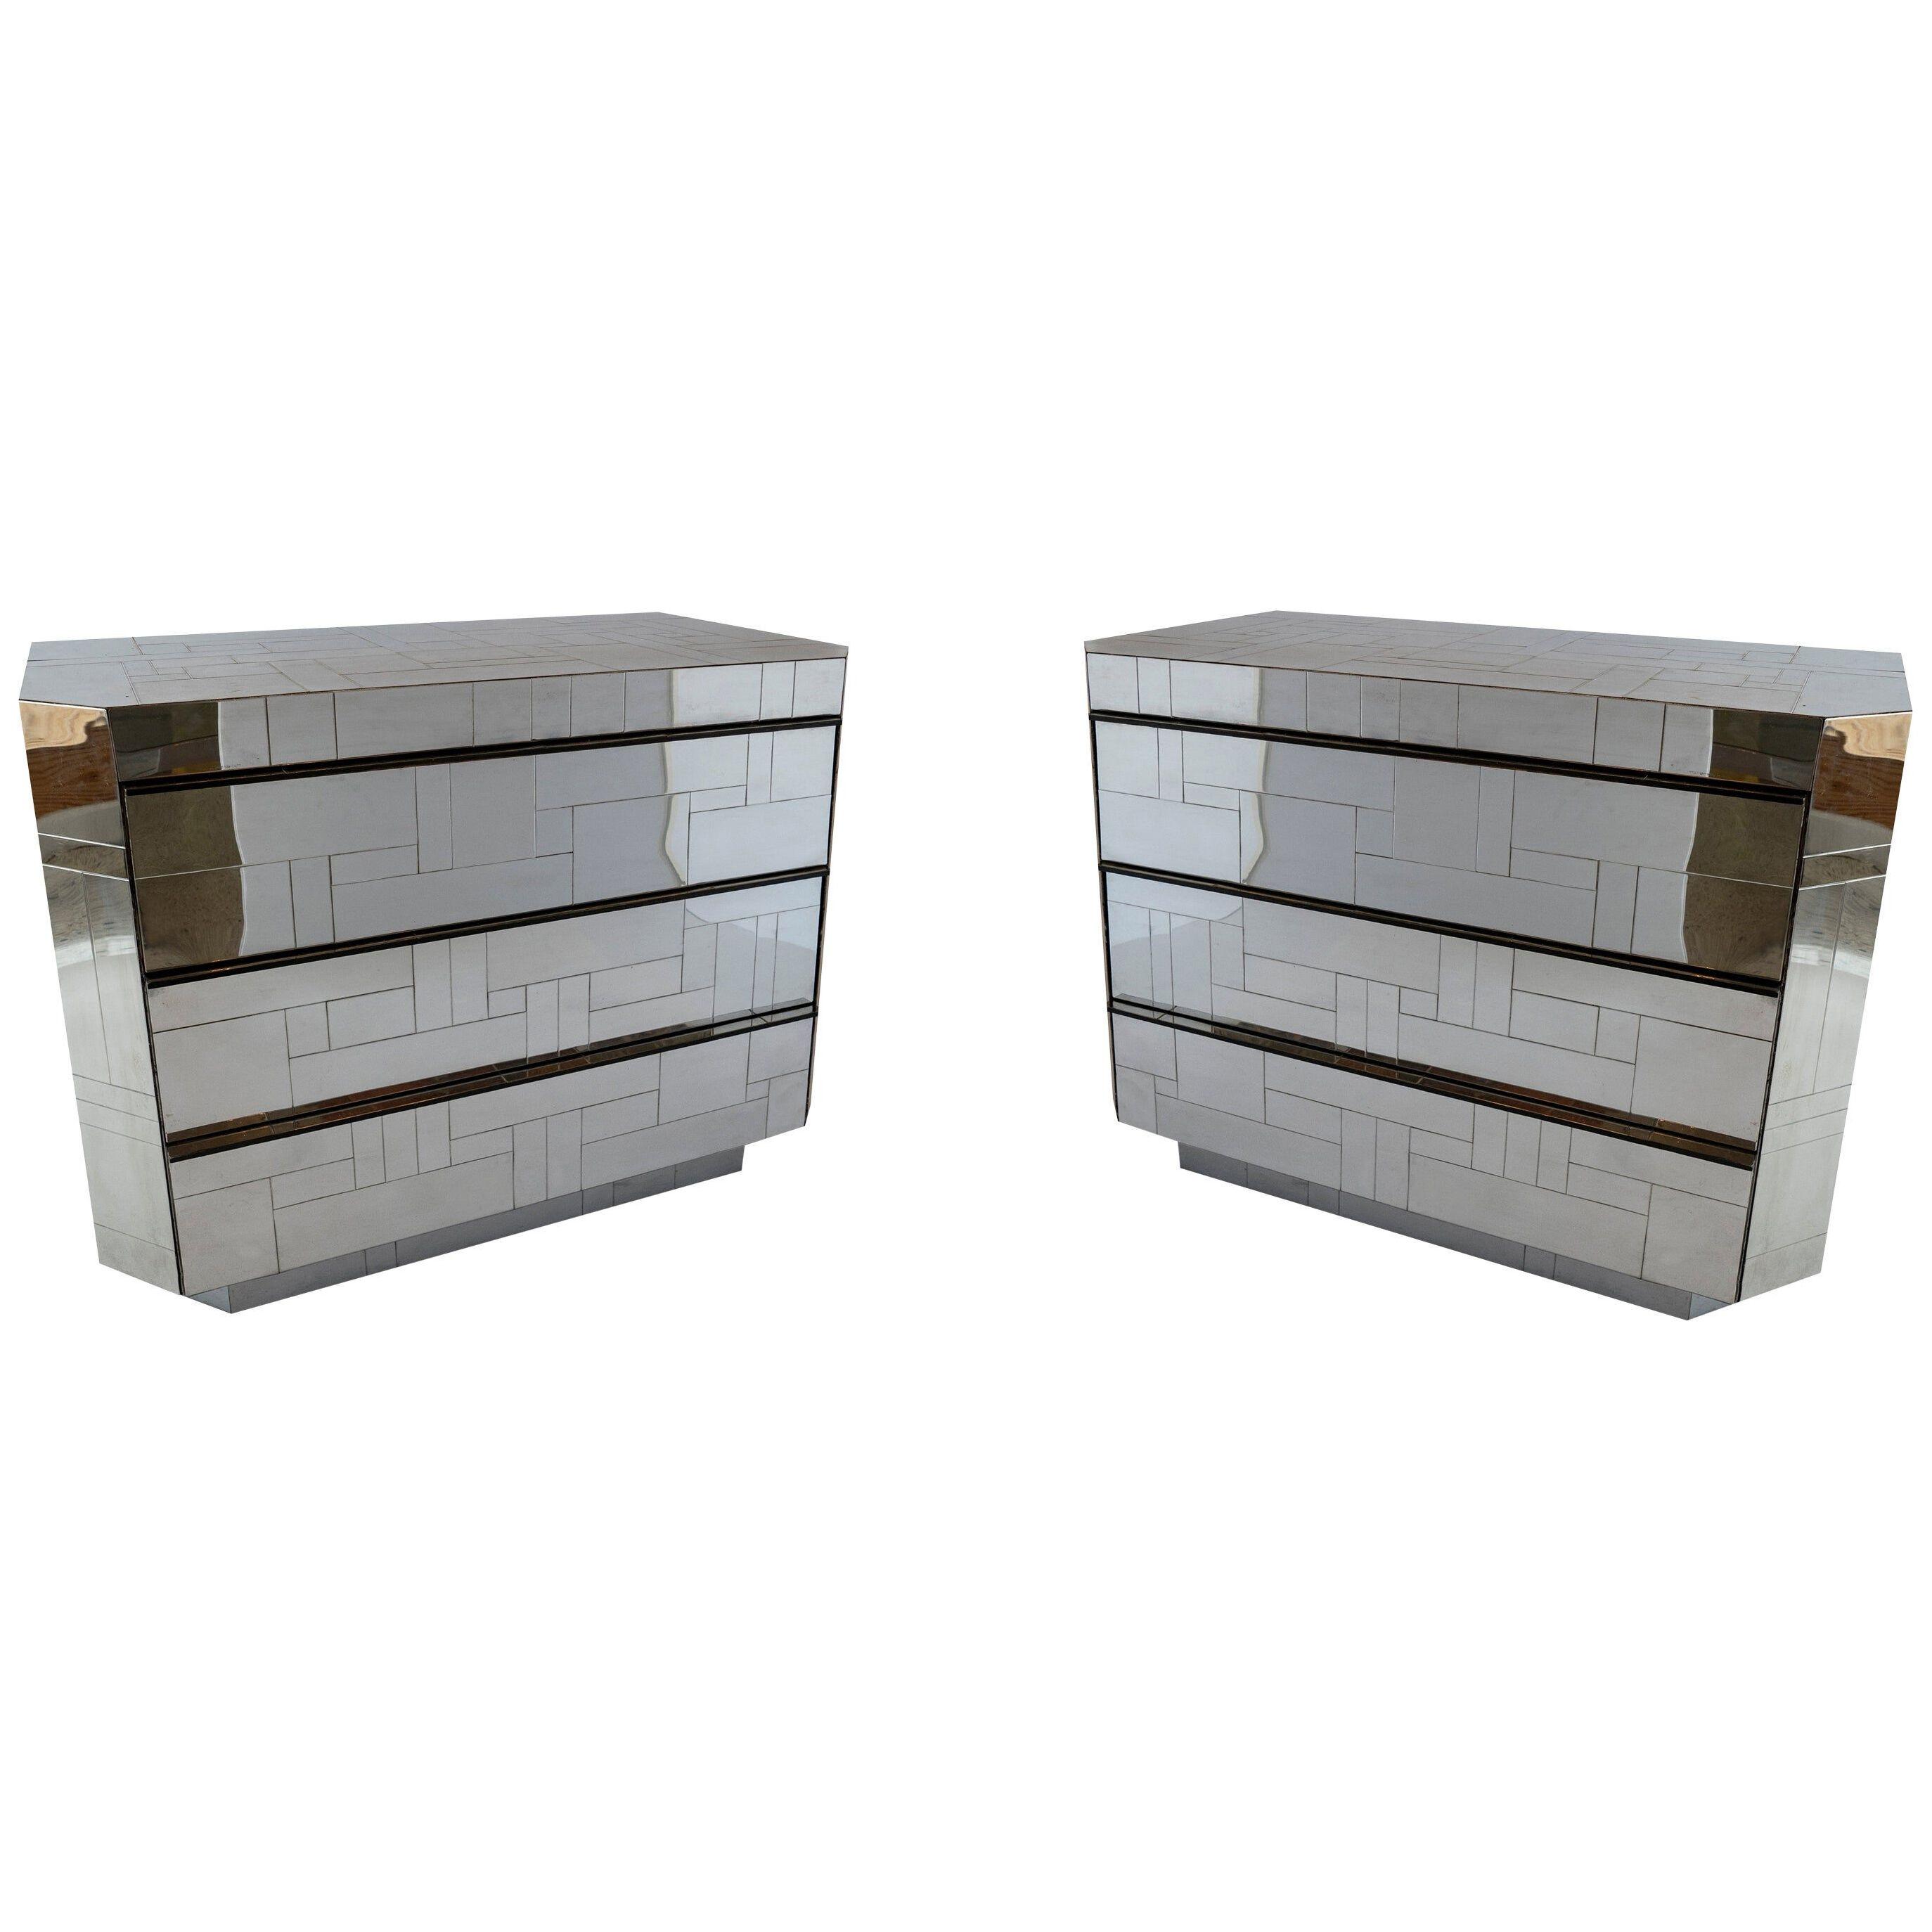 Pair of American Modern Polished Chrome Citiscape Chests, Paul Evans